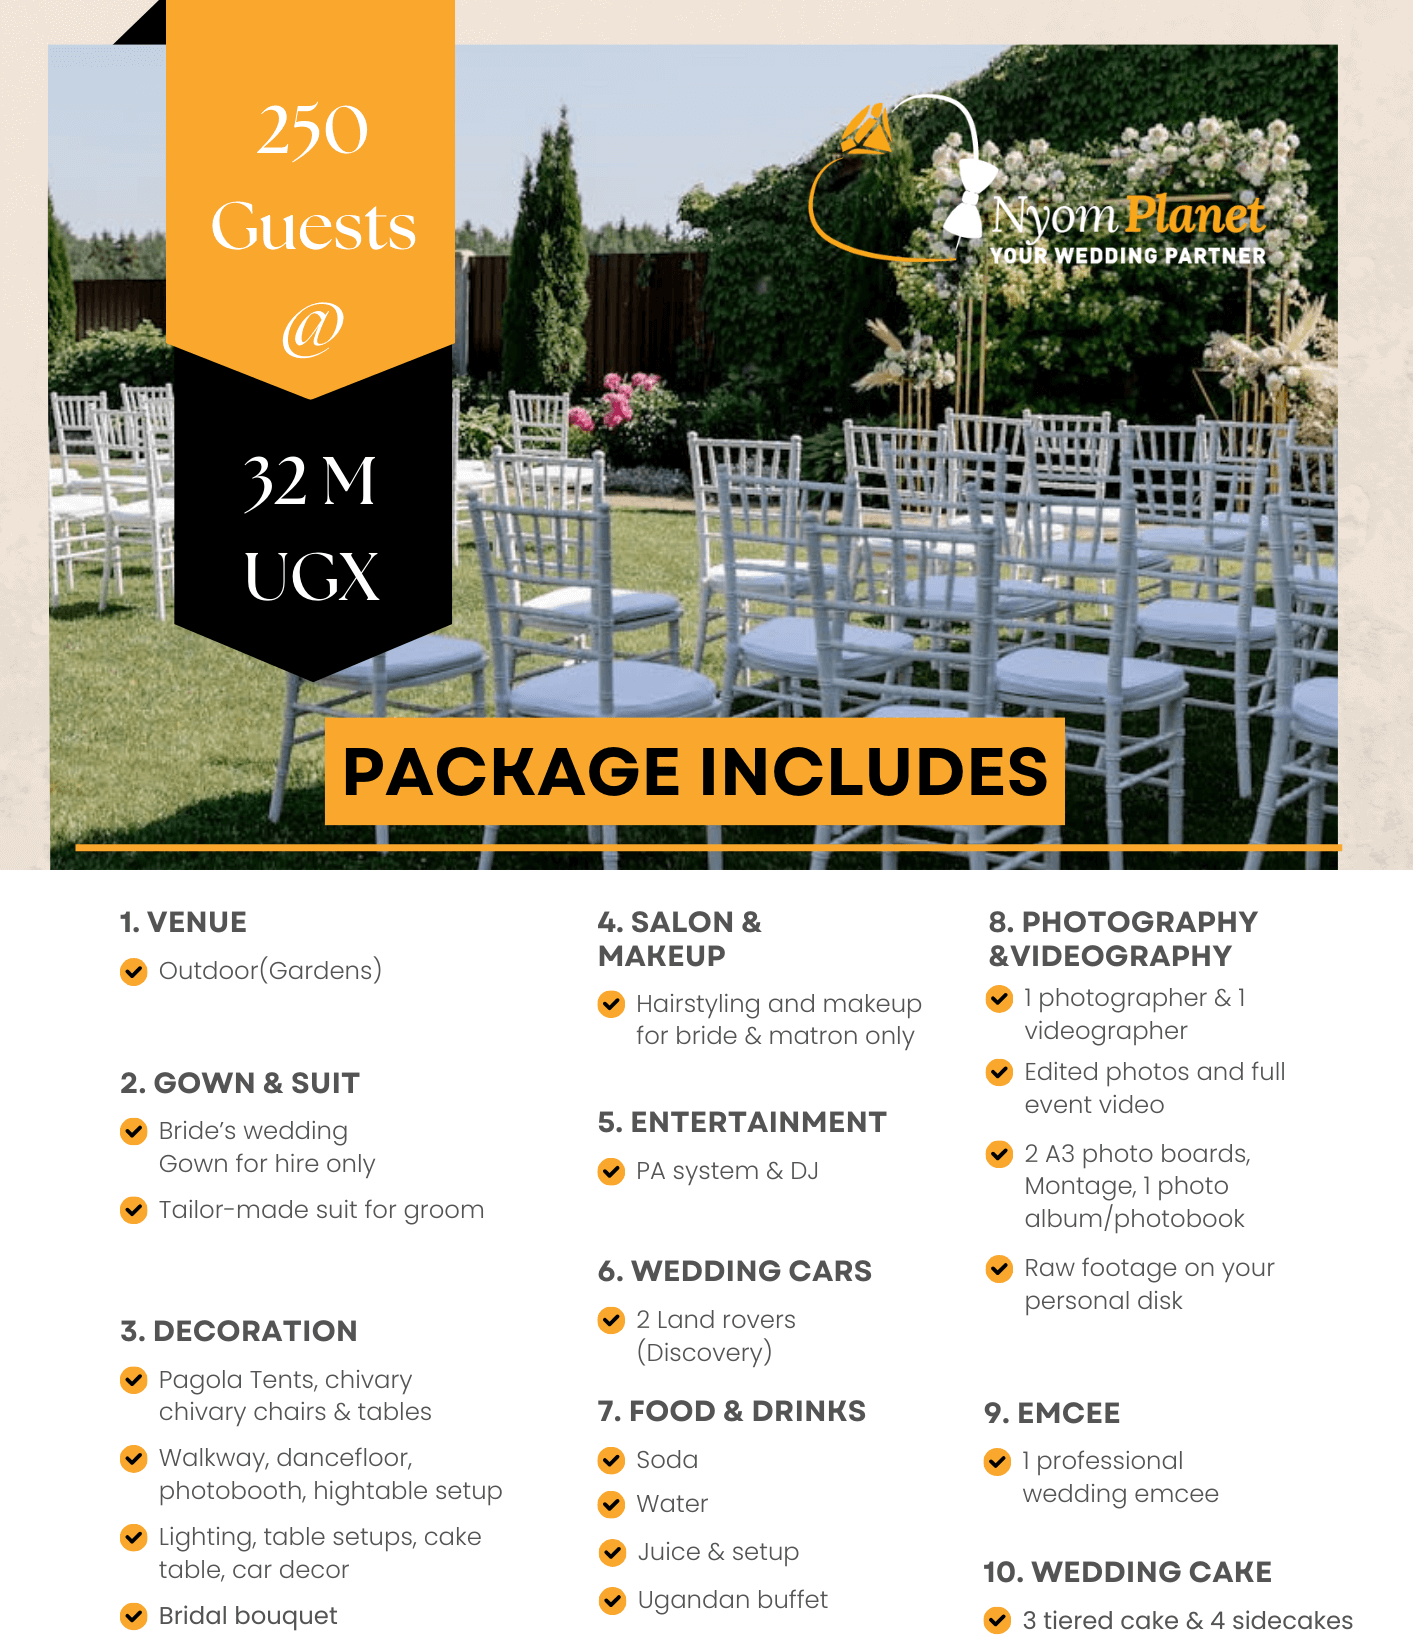 250 Guests wedding package at 32m ugx